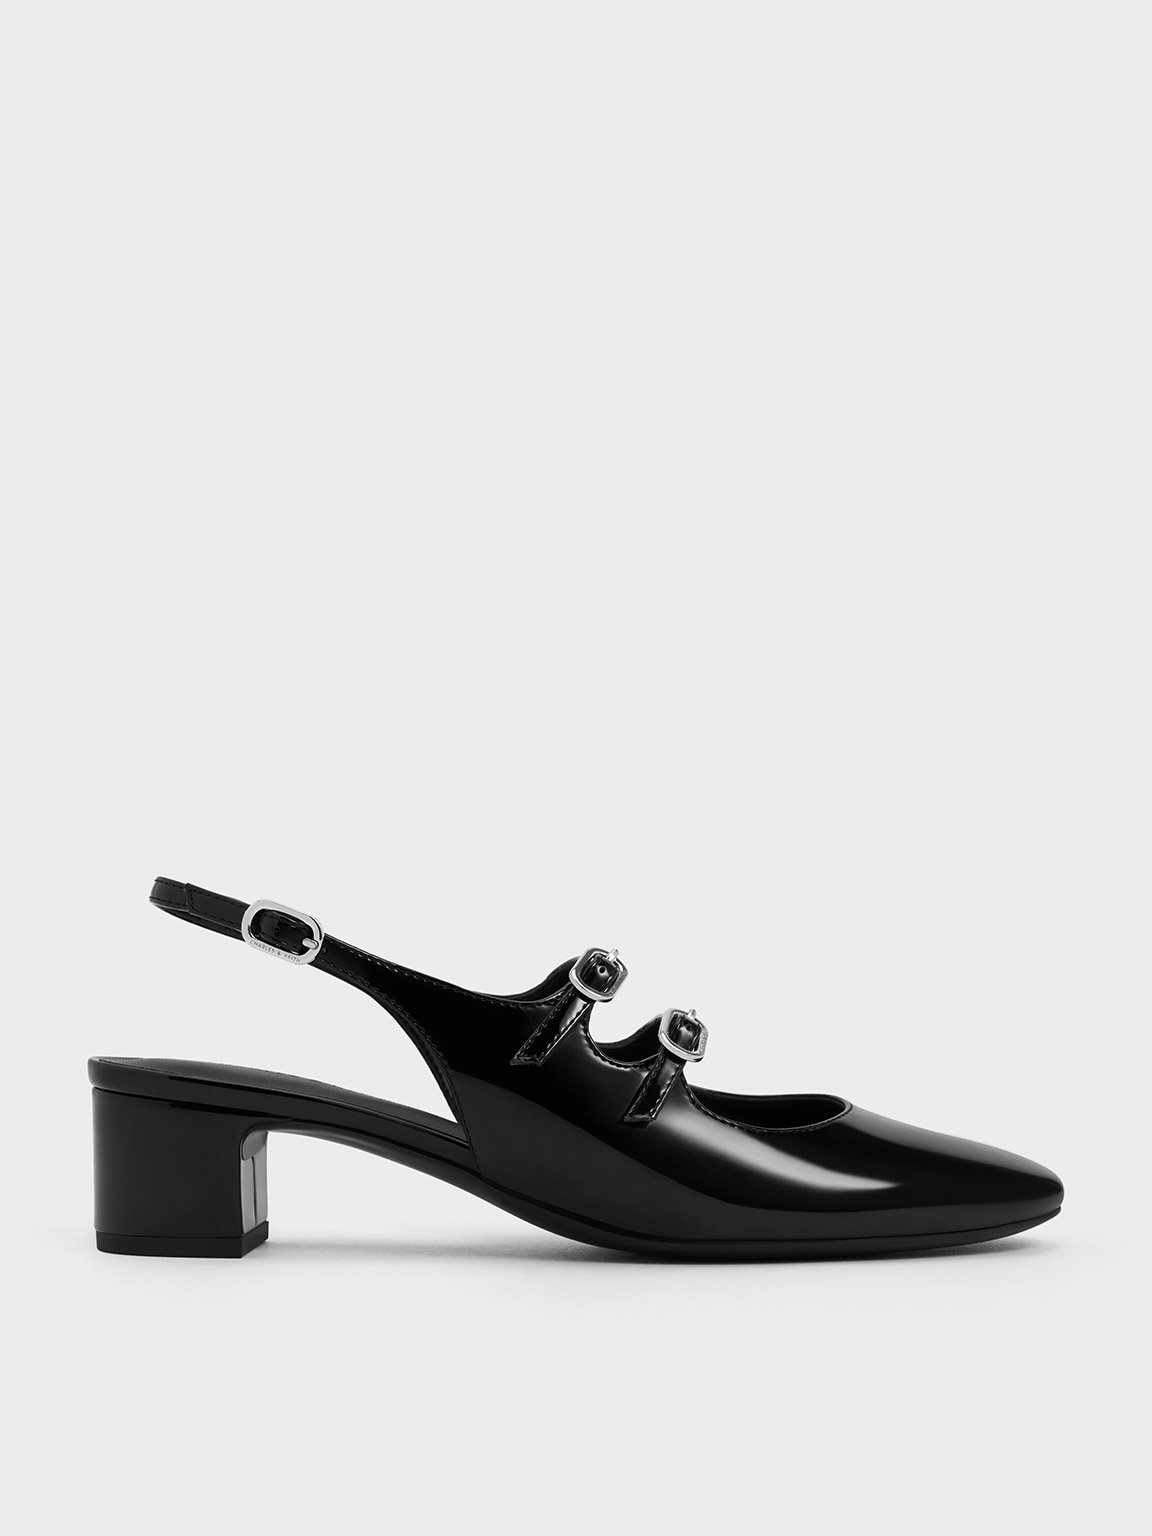 Black Boxed Double-Strap Slingback Mary Jane Pumps | CHARLES & KEITH